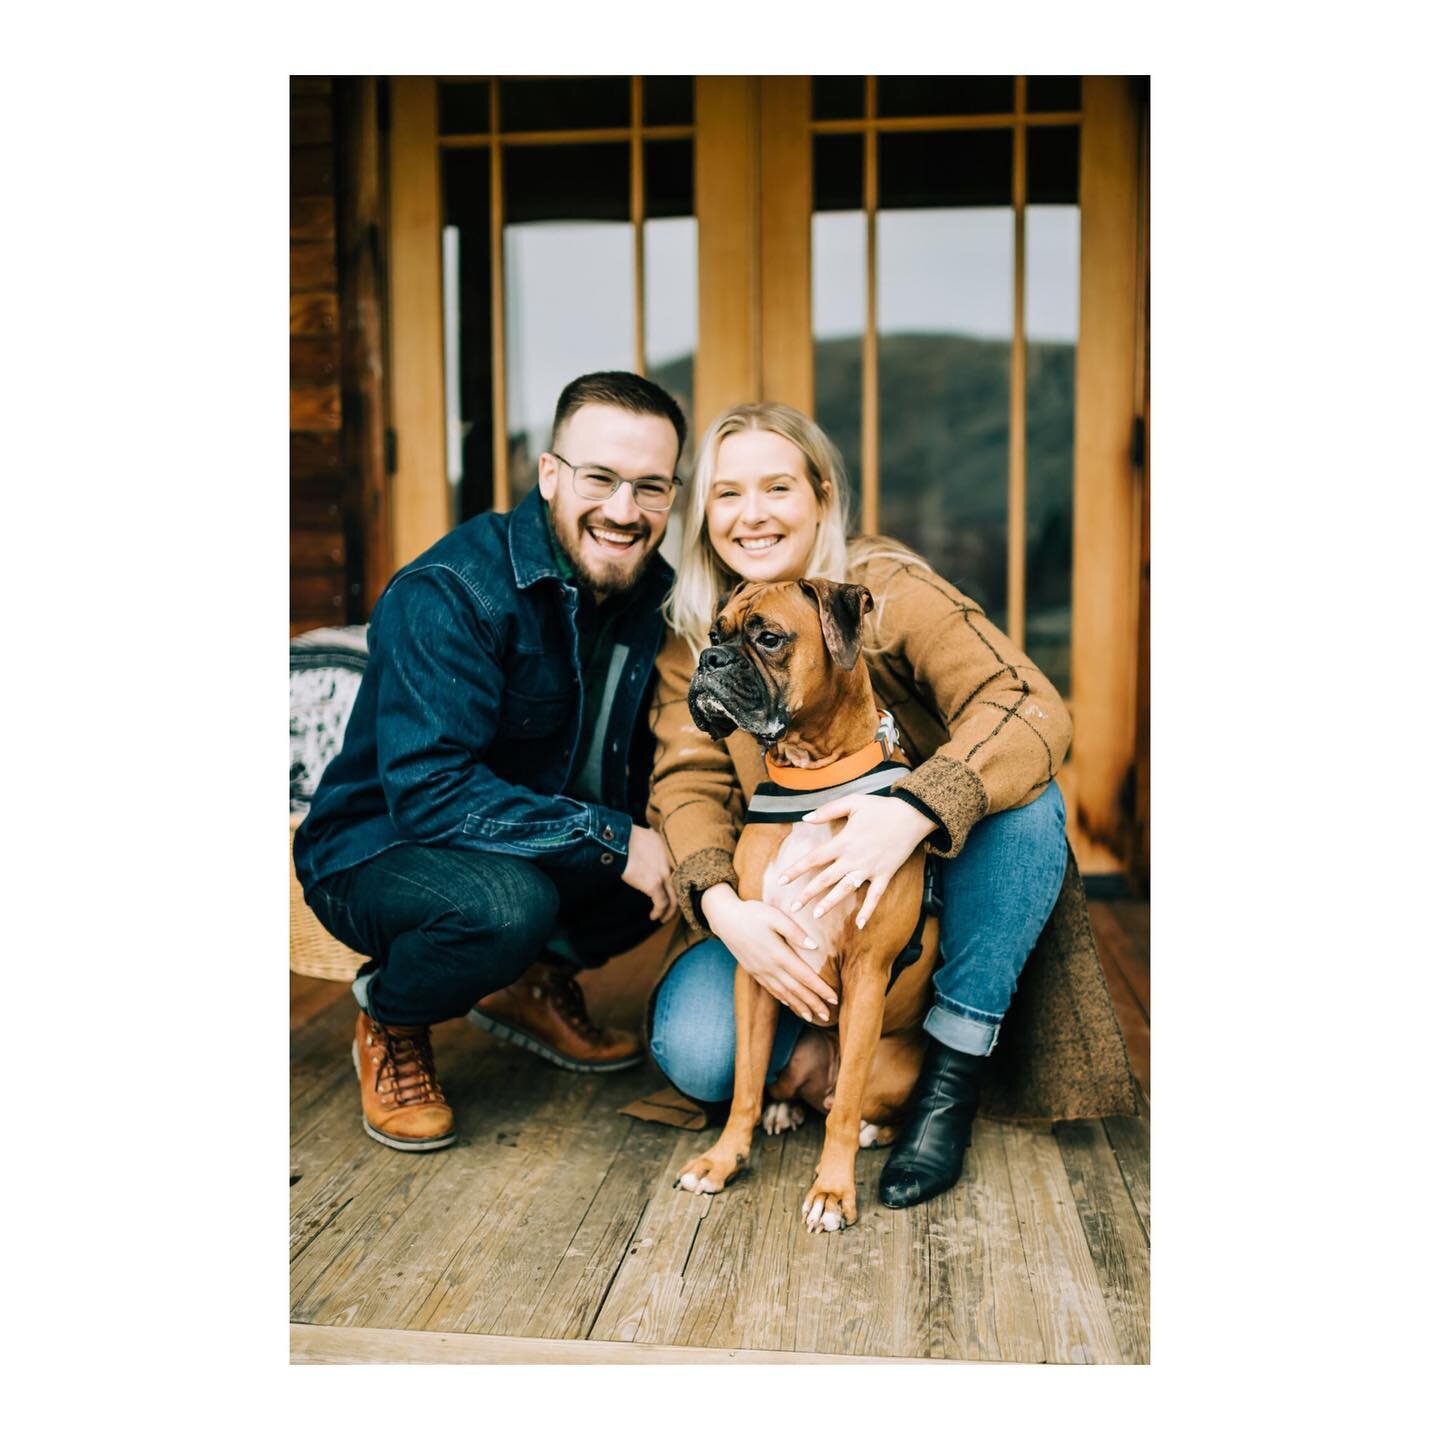 Putting the final touches on this surprise engagement in Winthrop, WA 🥰 They had me at boxer puppy 😭
.
.
#wenatchee #wenatcheephotographer #chelanphotographer #chelanweddingphotographer #wenatcheeweddingphotographer #methowvalley #winthropwa #mazam